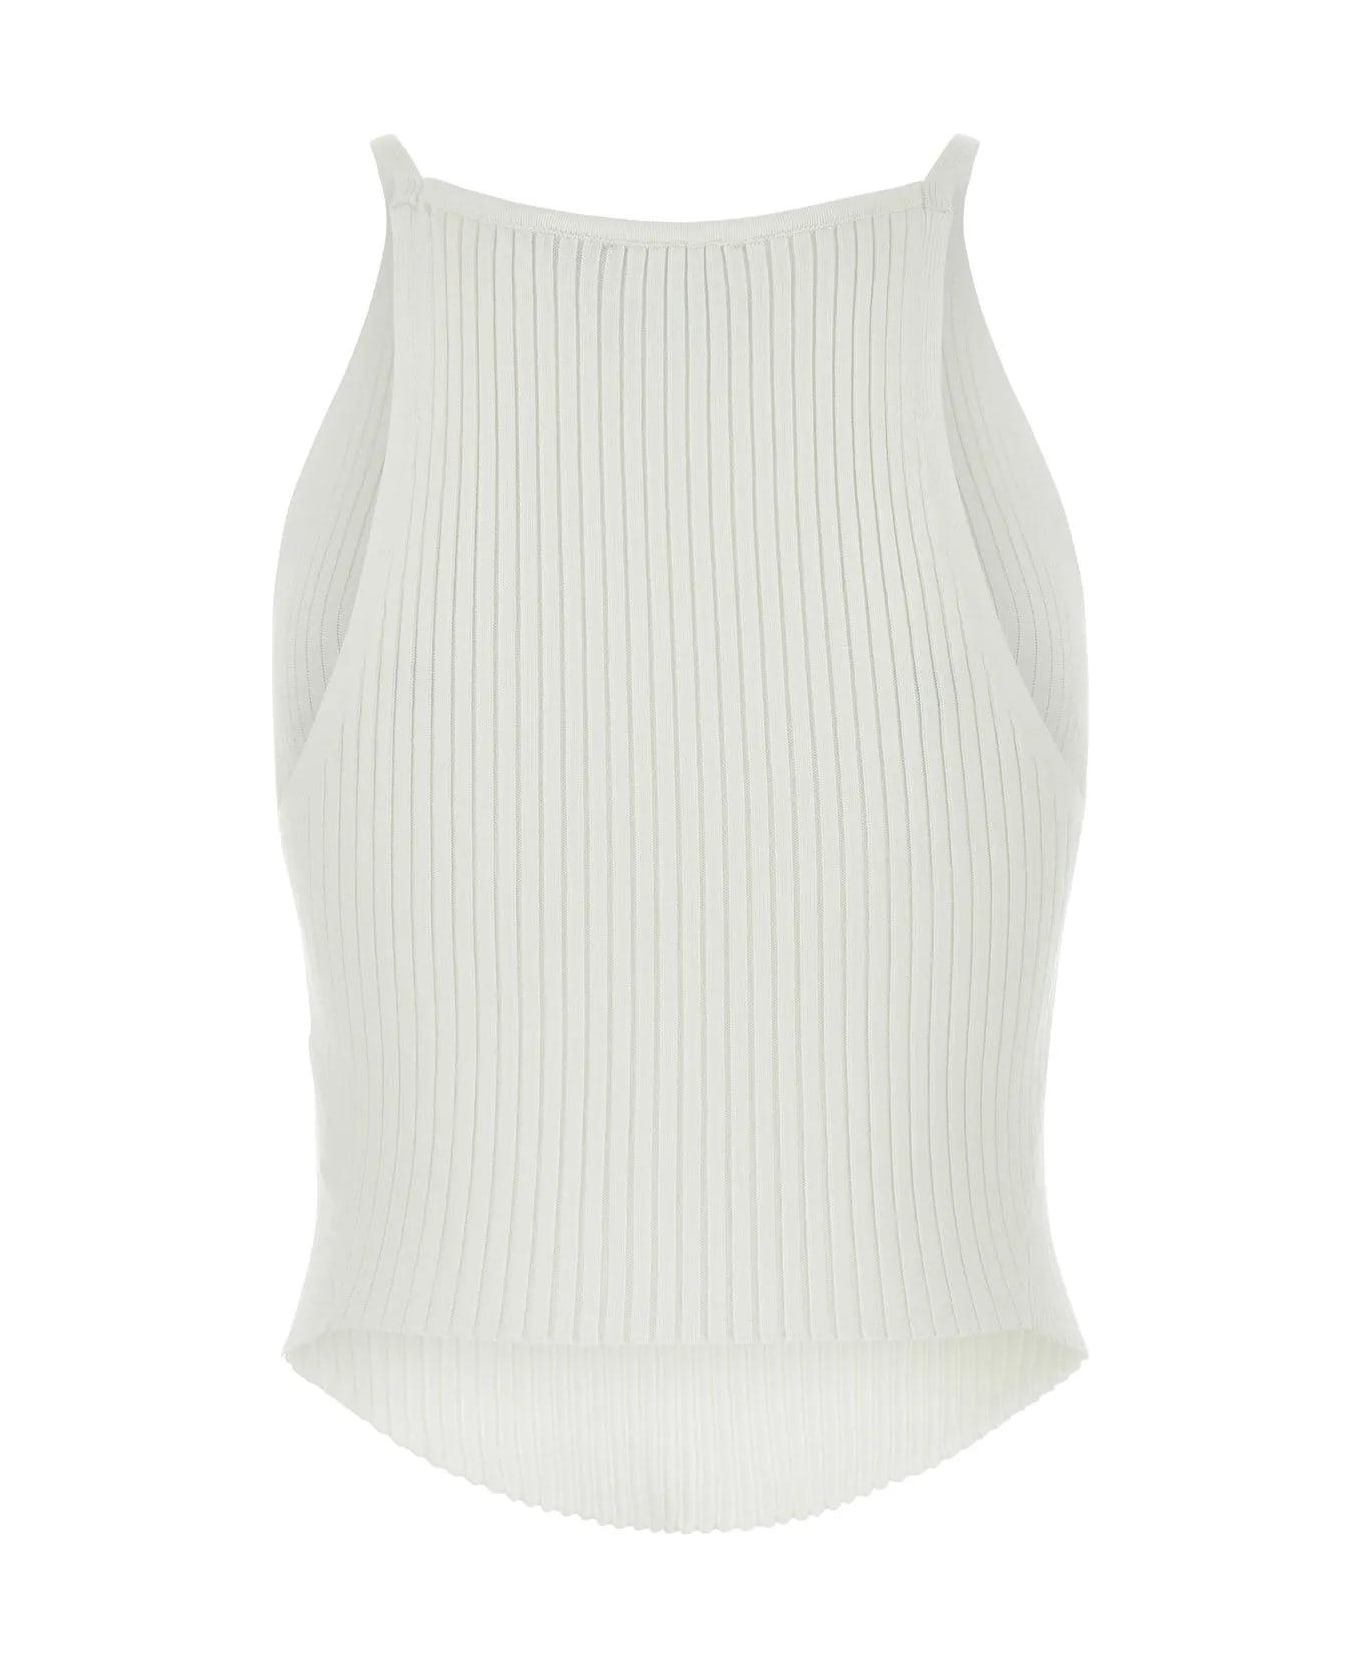 Courrèges White Viscose Blend Top - Heritage White ボディスーツ